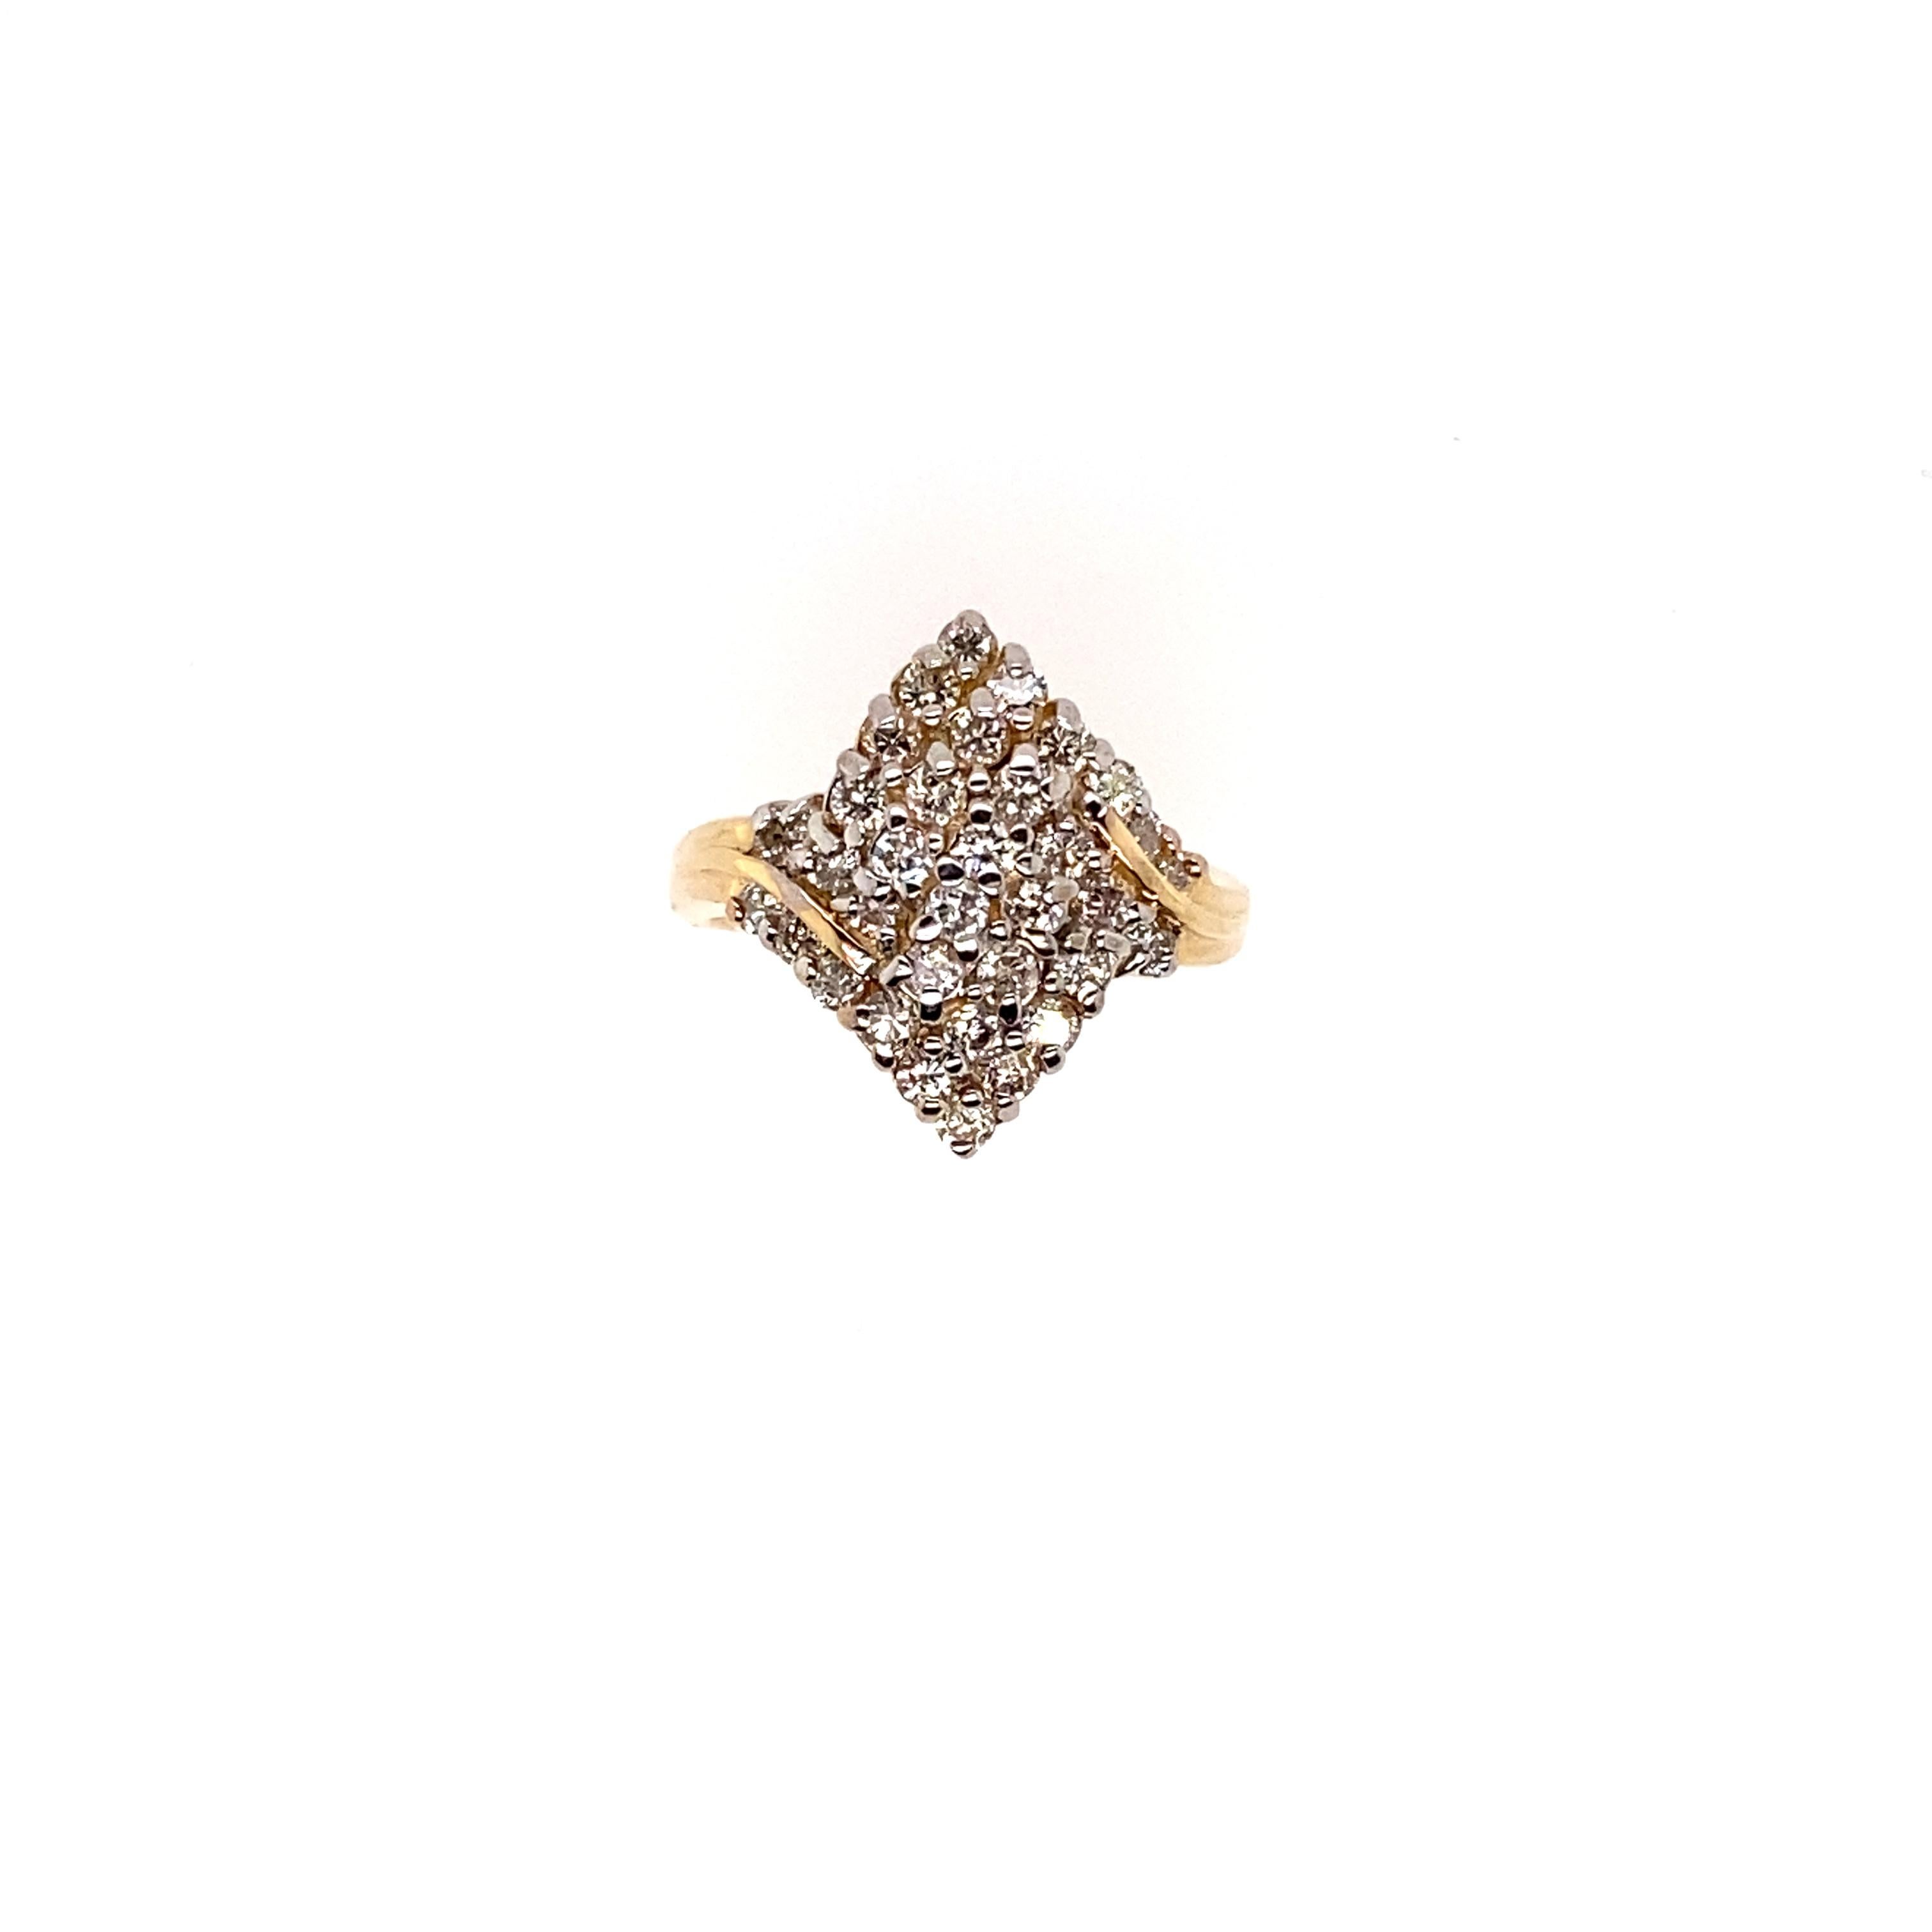 The twenty-four brilliant round diamonds set in the 14K yellow gold ring featured by a cluster design. This ring features a very fashionable look and can be worn daily-wear. 

Diamonds Weight: 0.81 carat
Diamonds Shape : Brilliant Round
Diamonds